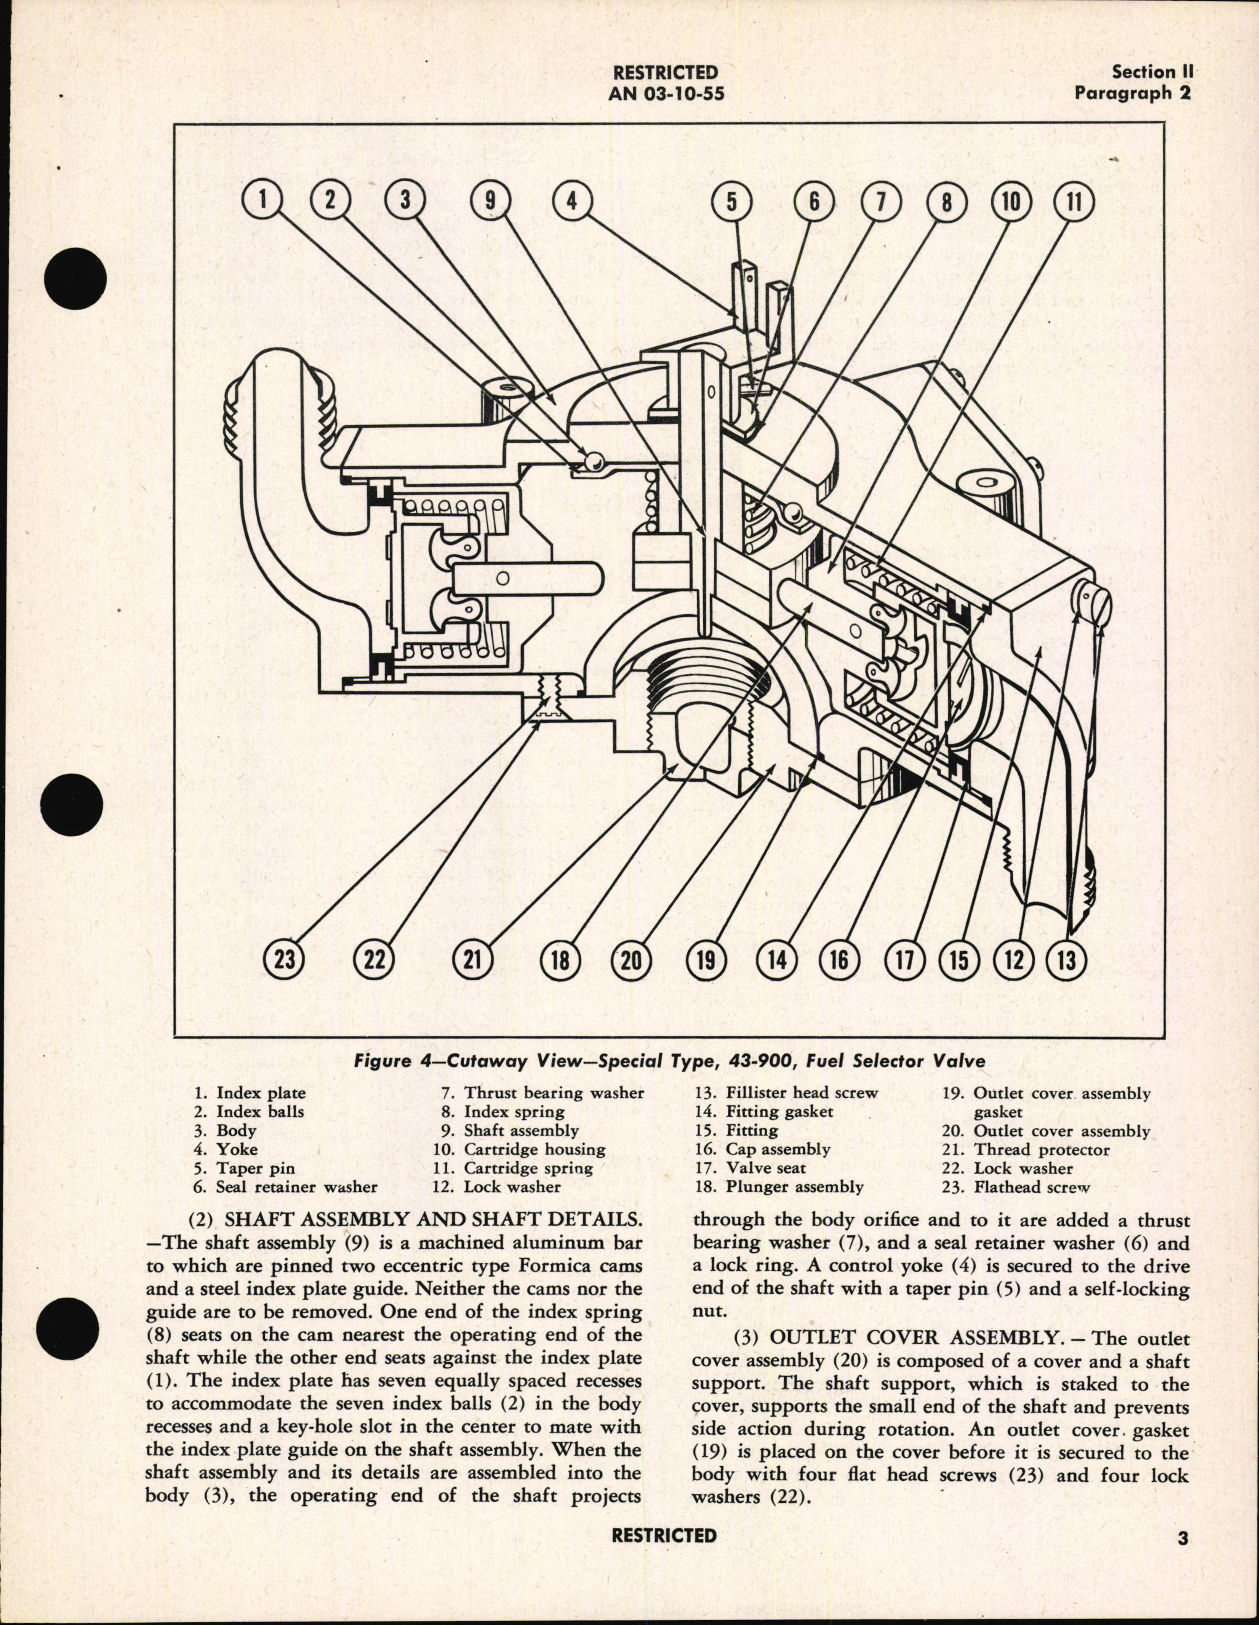 Sample page 7 from AirCorps Library document: Overhaul Instructions with Parts Catalog for Type CG-3A (42-1000-2) and Special Type 43-900 Fuel Selector Valves